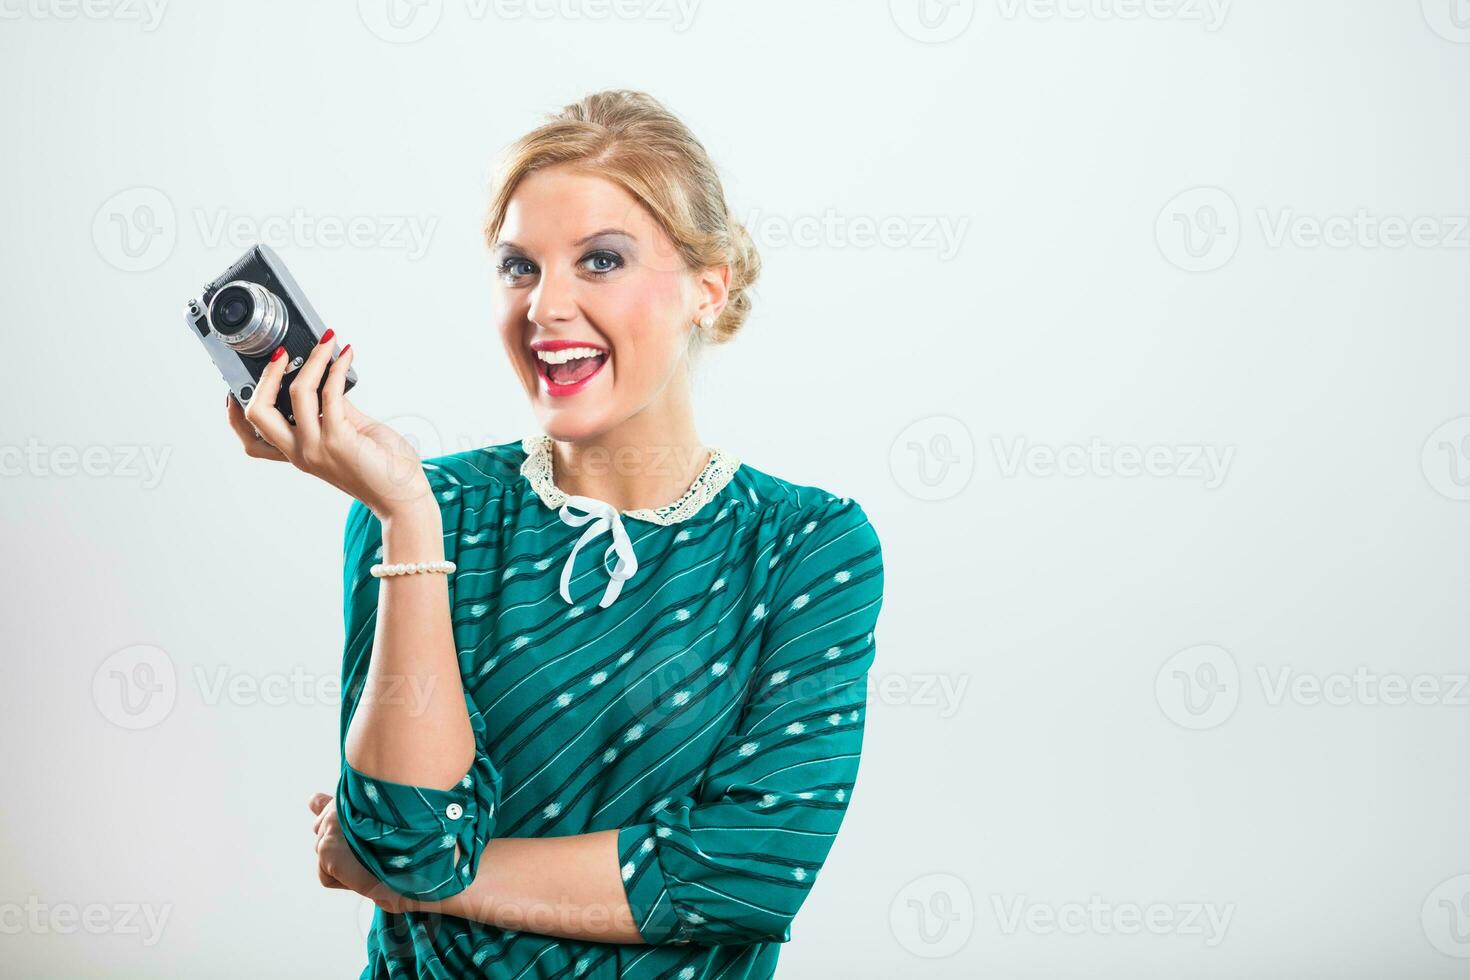 Retro woman with old camera smiling photo